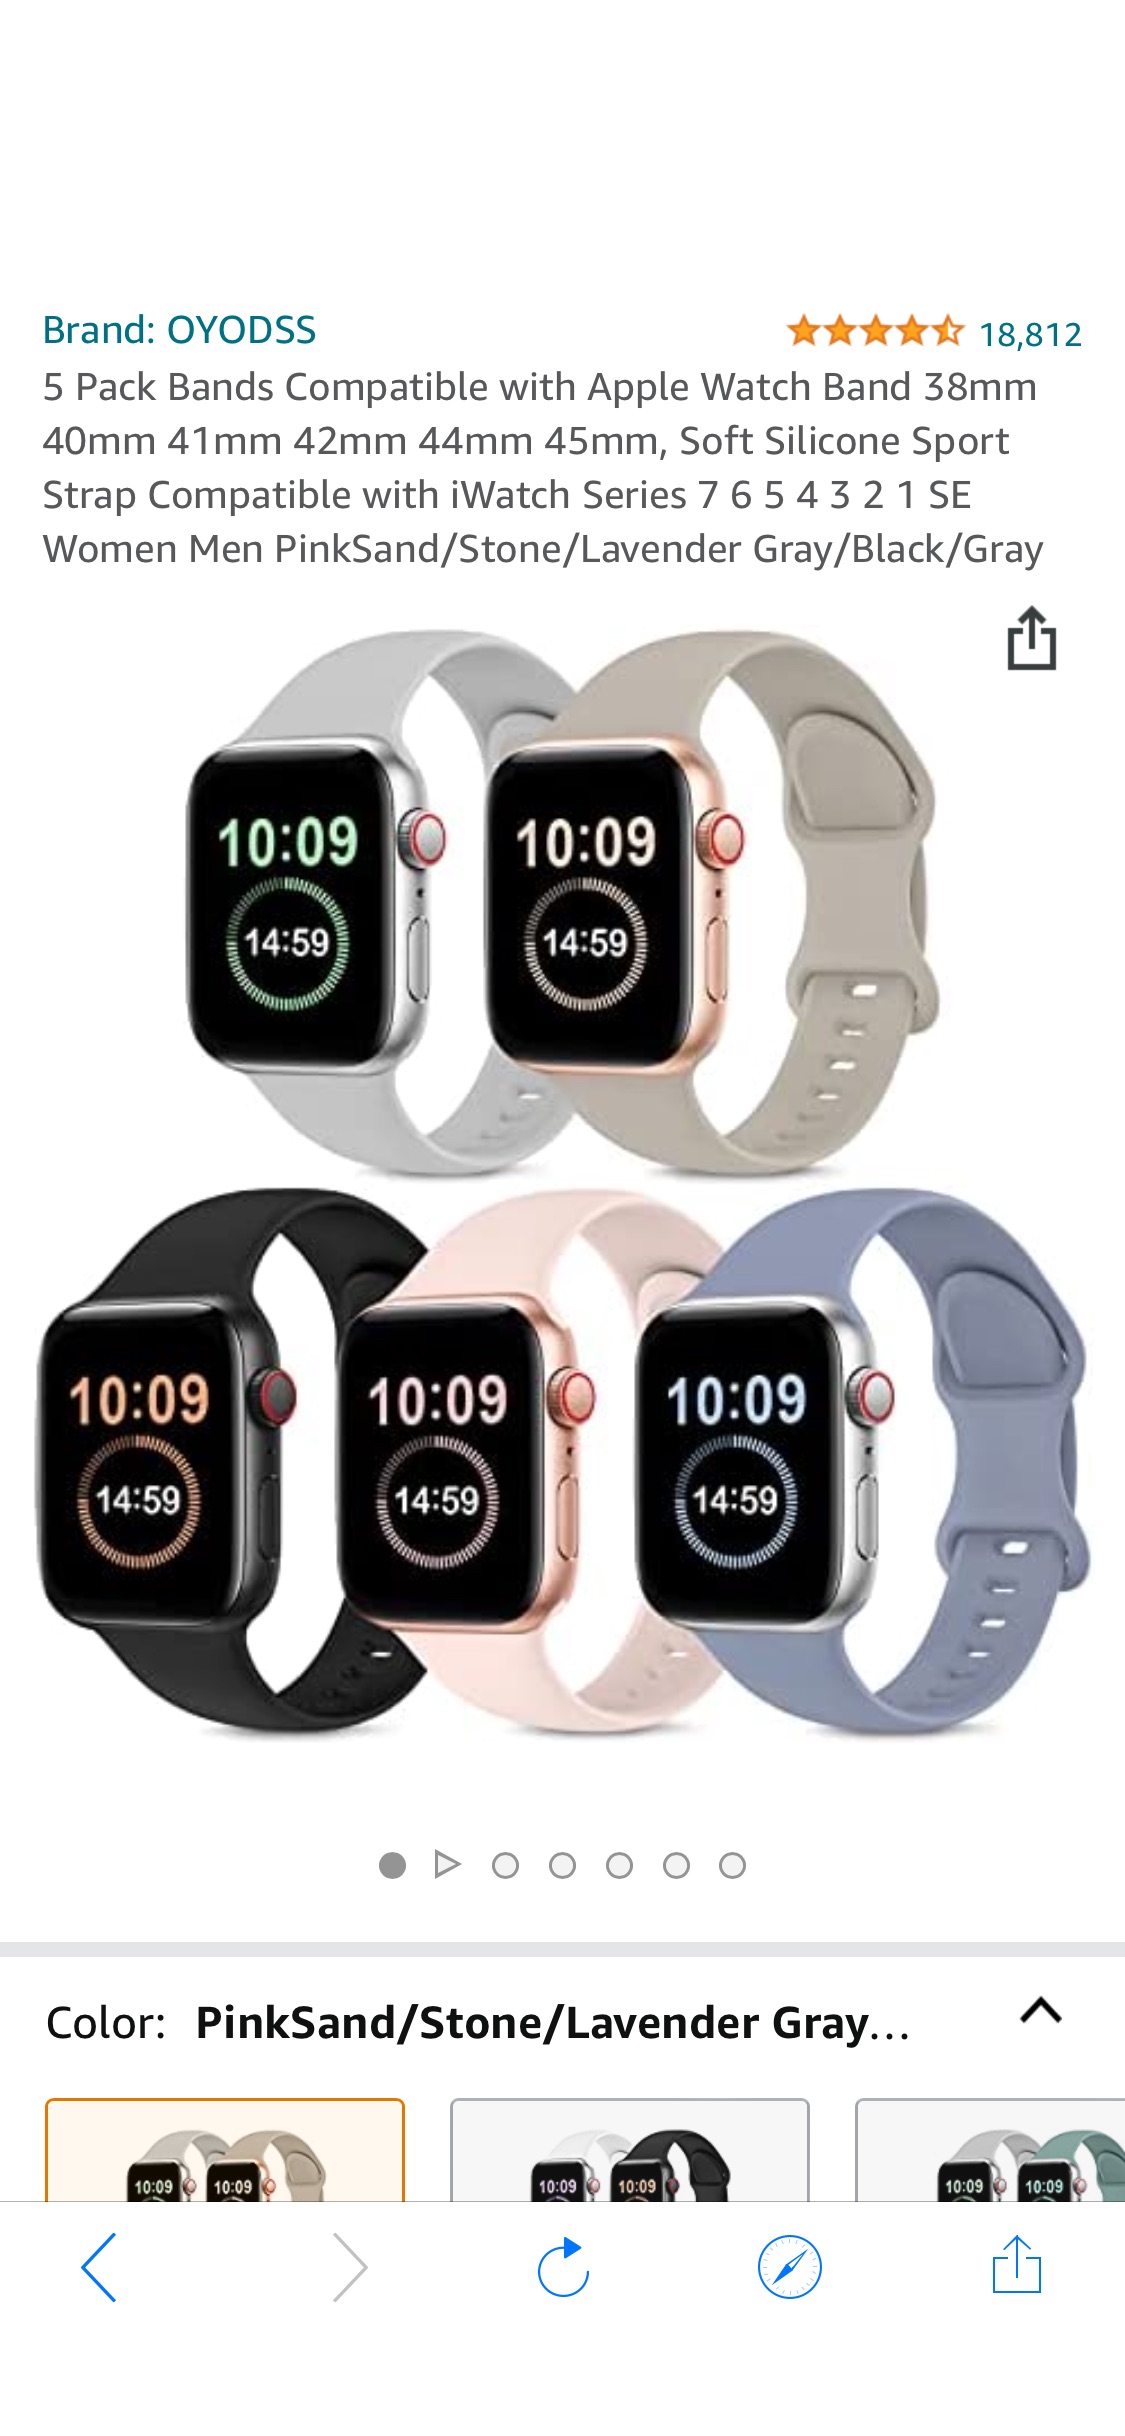 5 Pack Bands Compatible with Apple Watch Band 38mm 40mm 41mm 42mm 44mm 45mm, Soft Silicone Sport Strap Compatible with iWatch Series 7 6 5 4 3 2 1表带